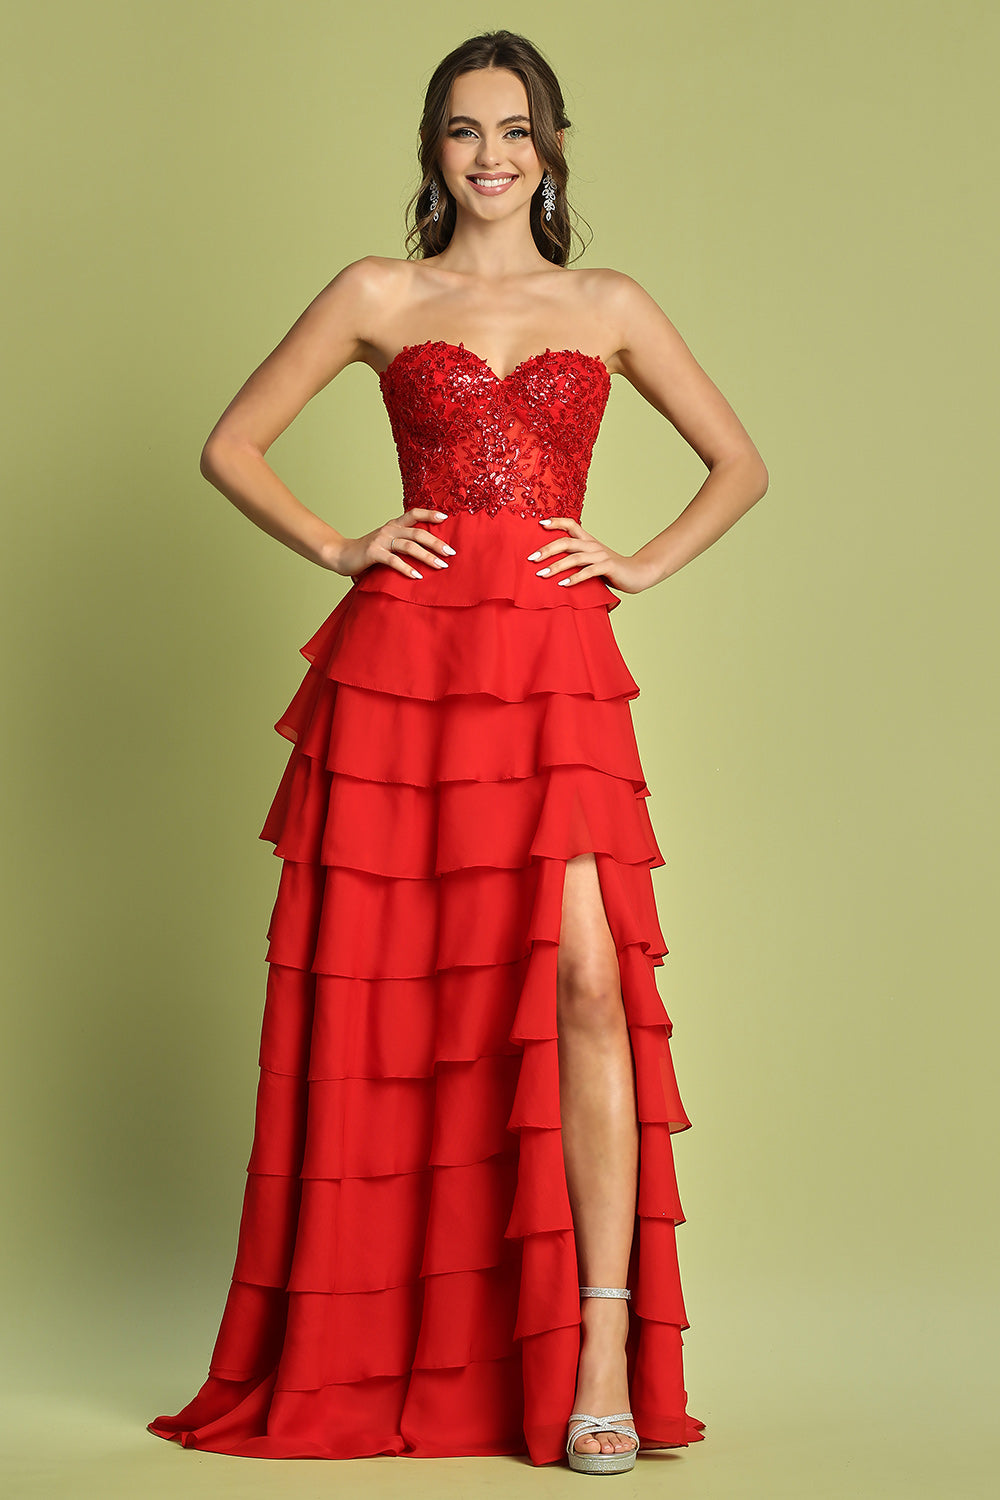 Applique Strapless Tiered A-line Slit Gown by Adora 3216